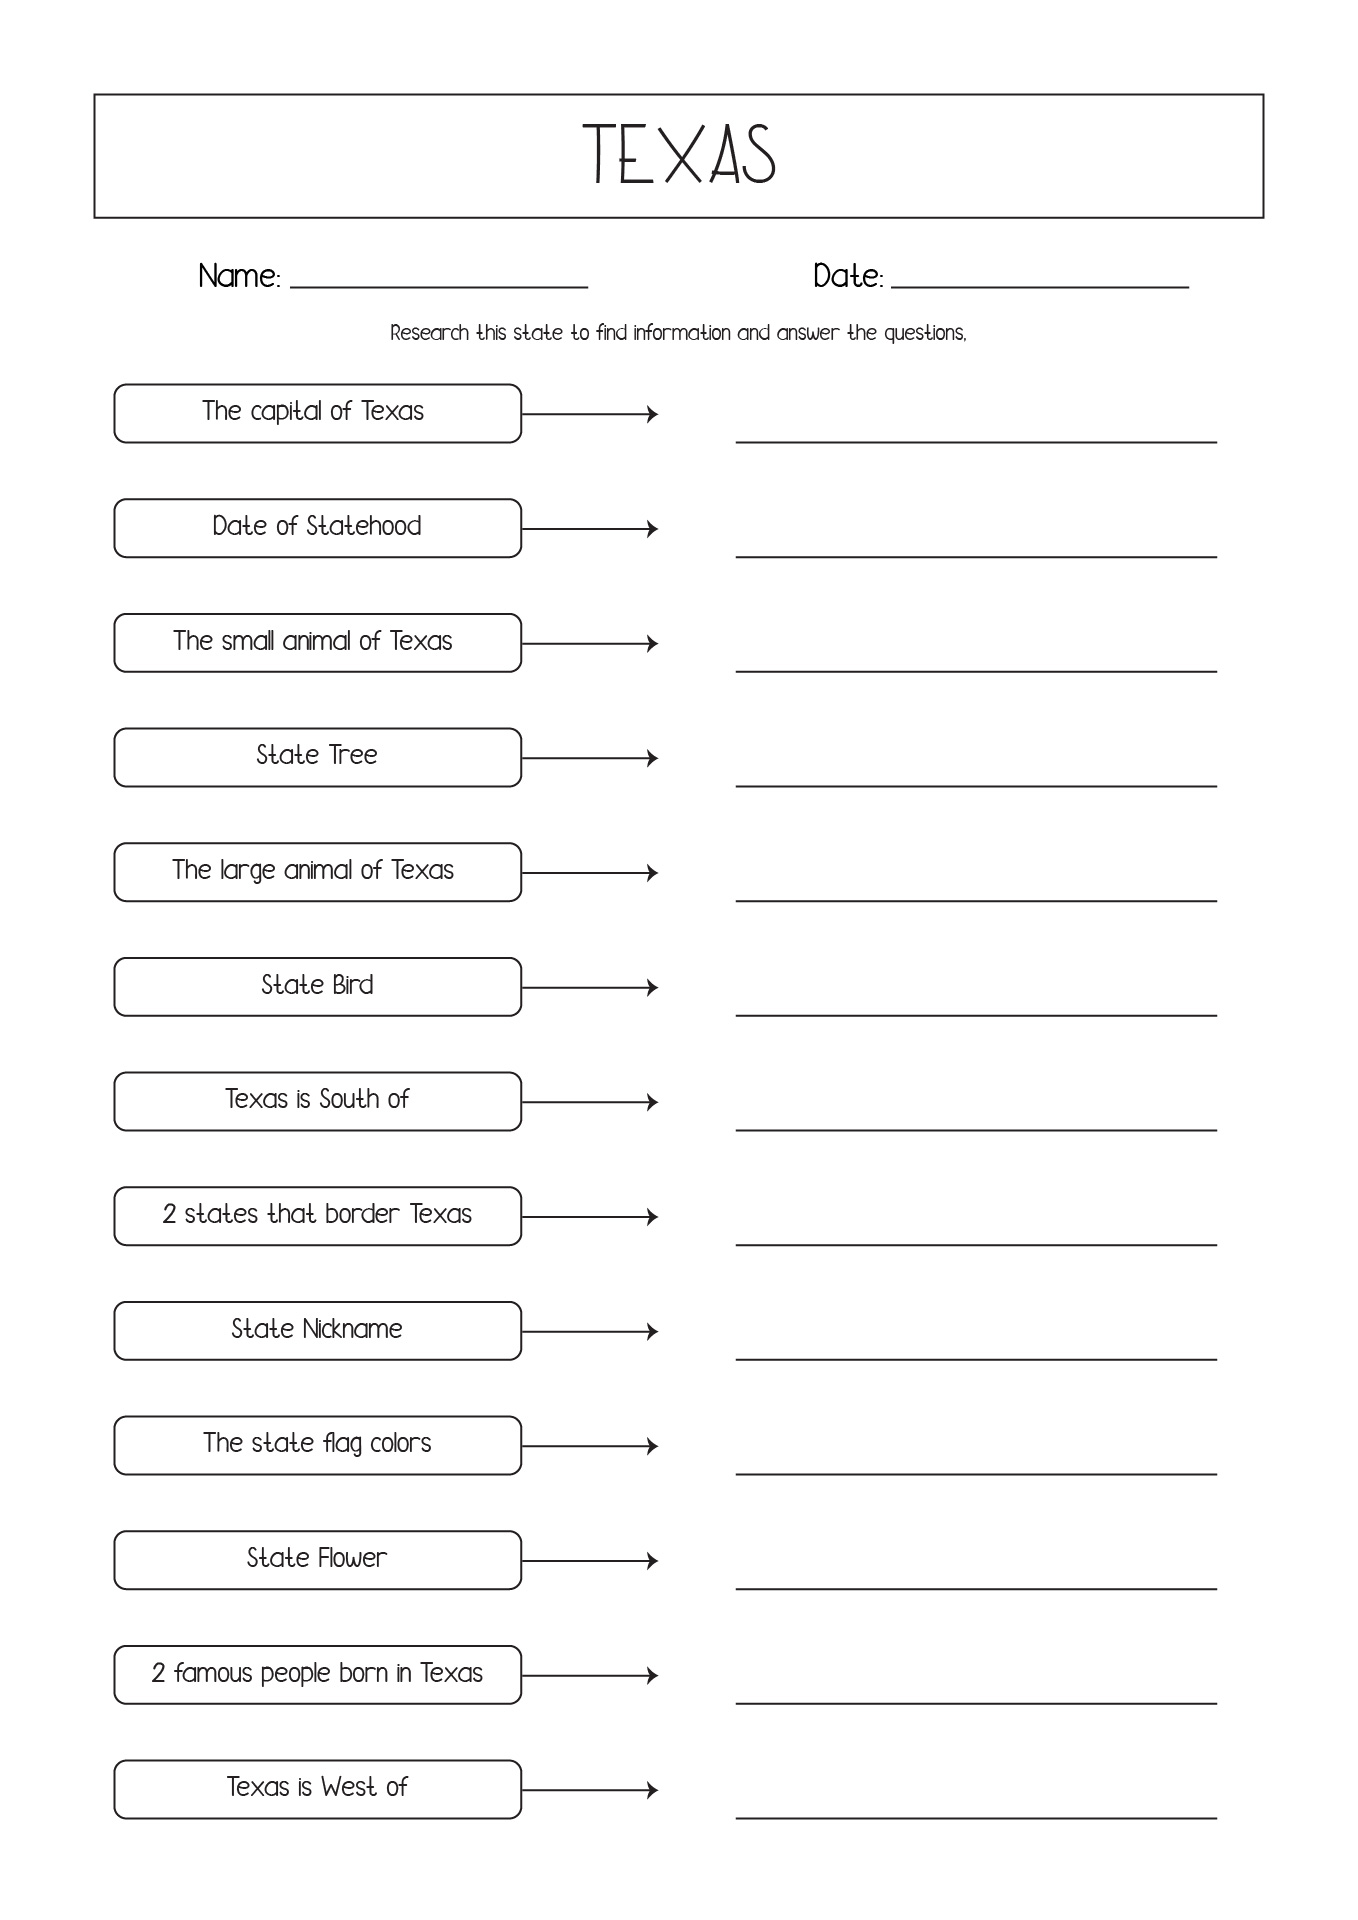 9-best-images-of-worksheet-about-texas-texas-symbols-worksheets-for-1st-grade-texas-history